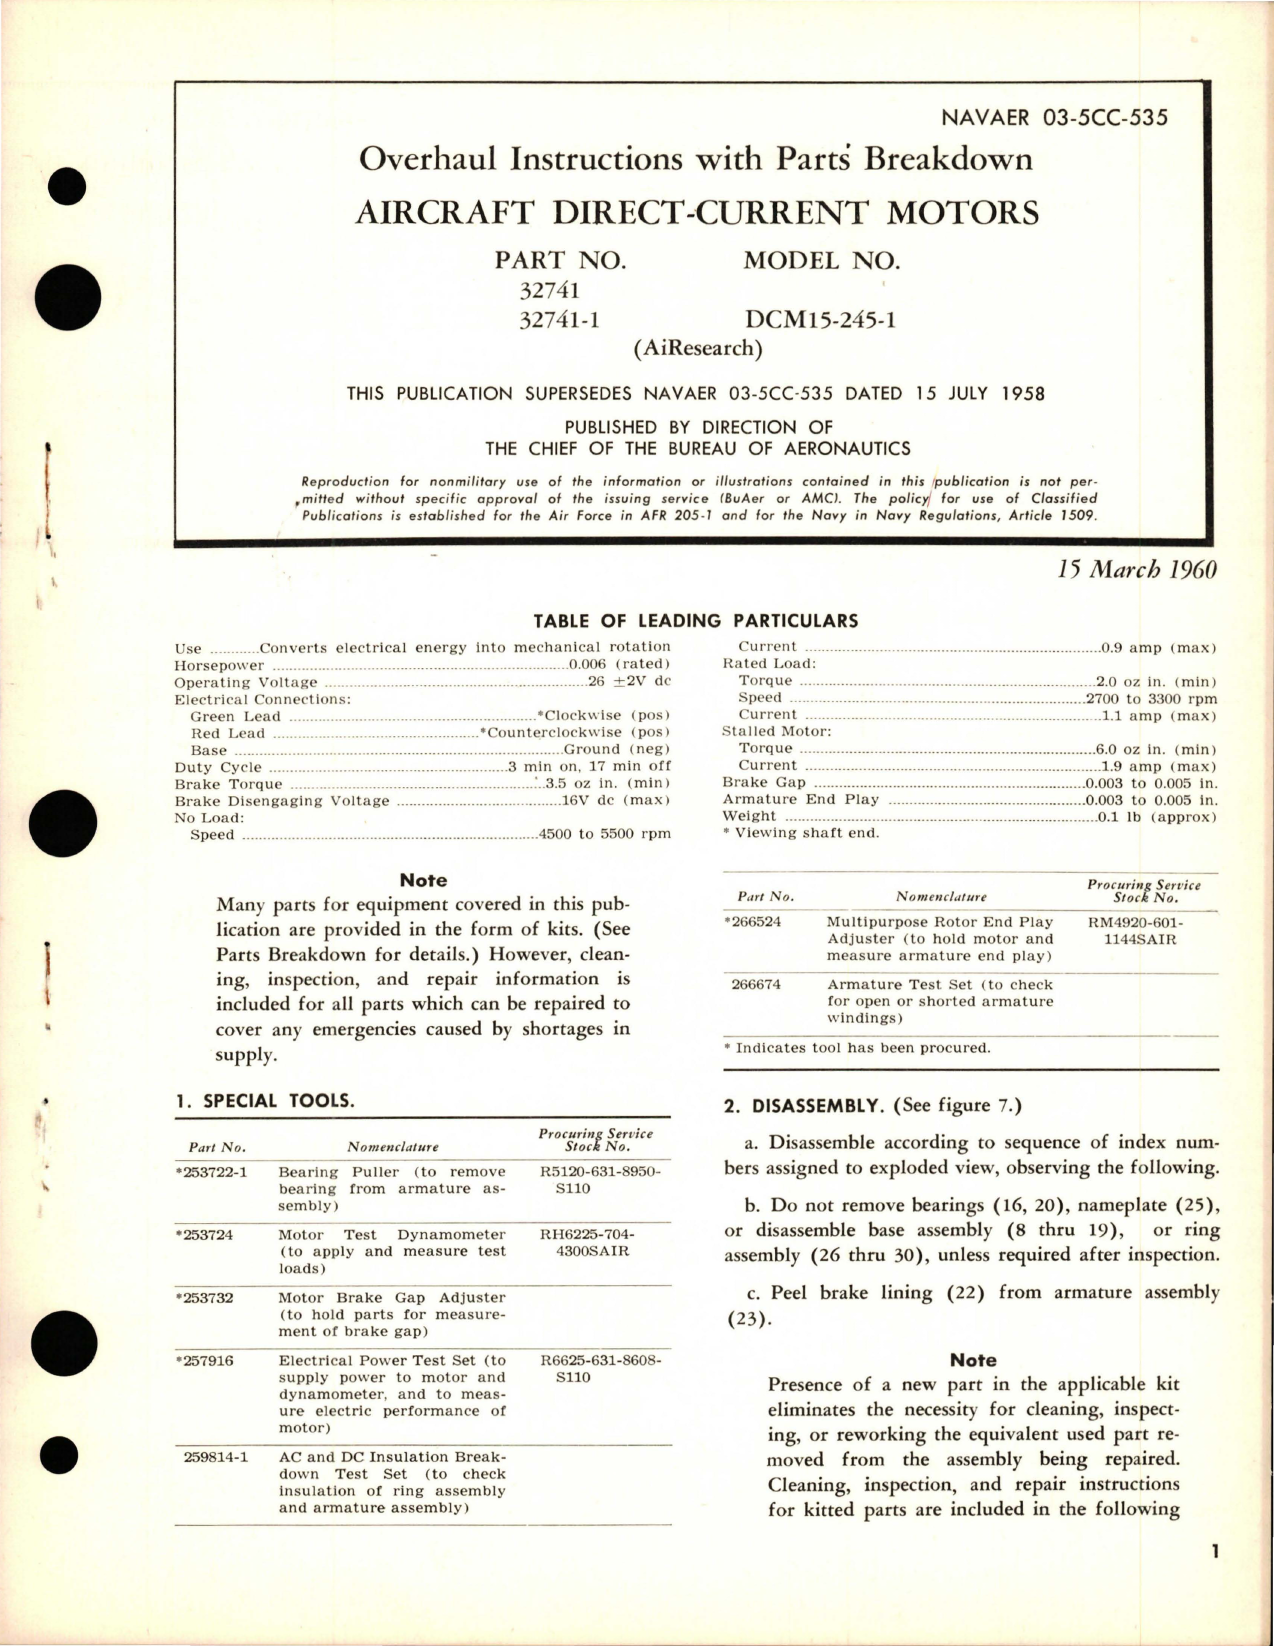 Sample page 1 from AirCorps Library document: Overhaul Instructions with Parts Breakdown for Direct-Current Motors - Parts 32741 and 32741-1 - Model DCM15-245-1